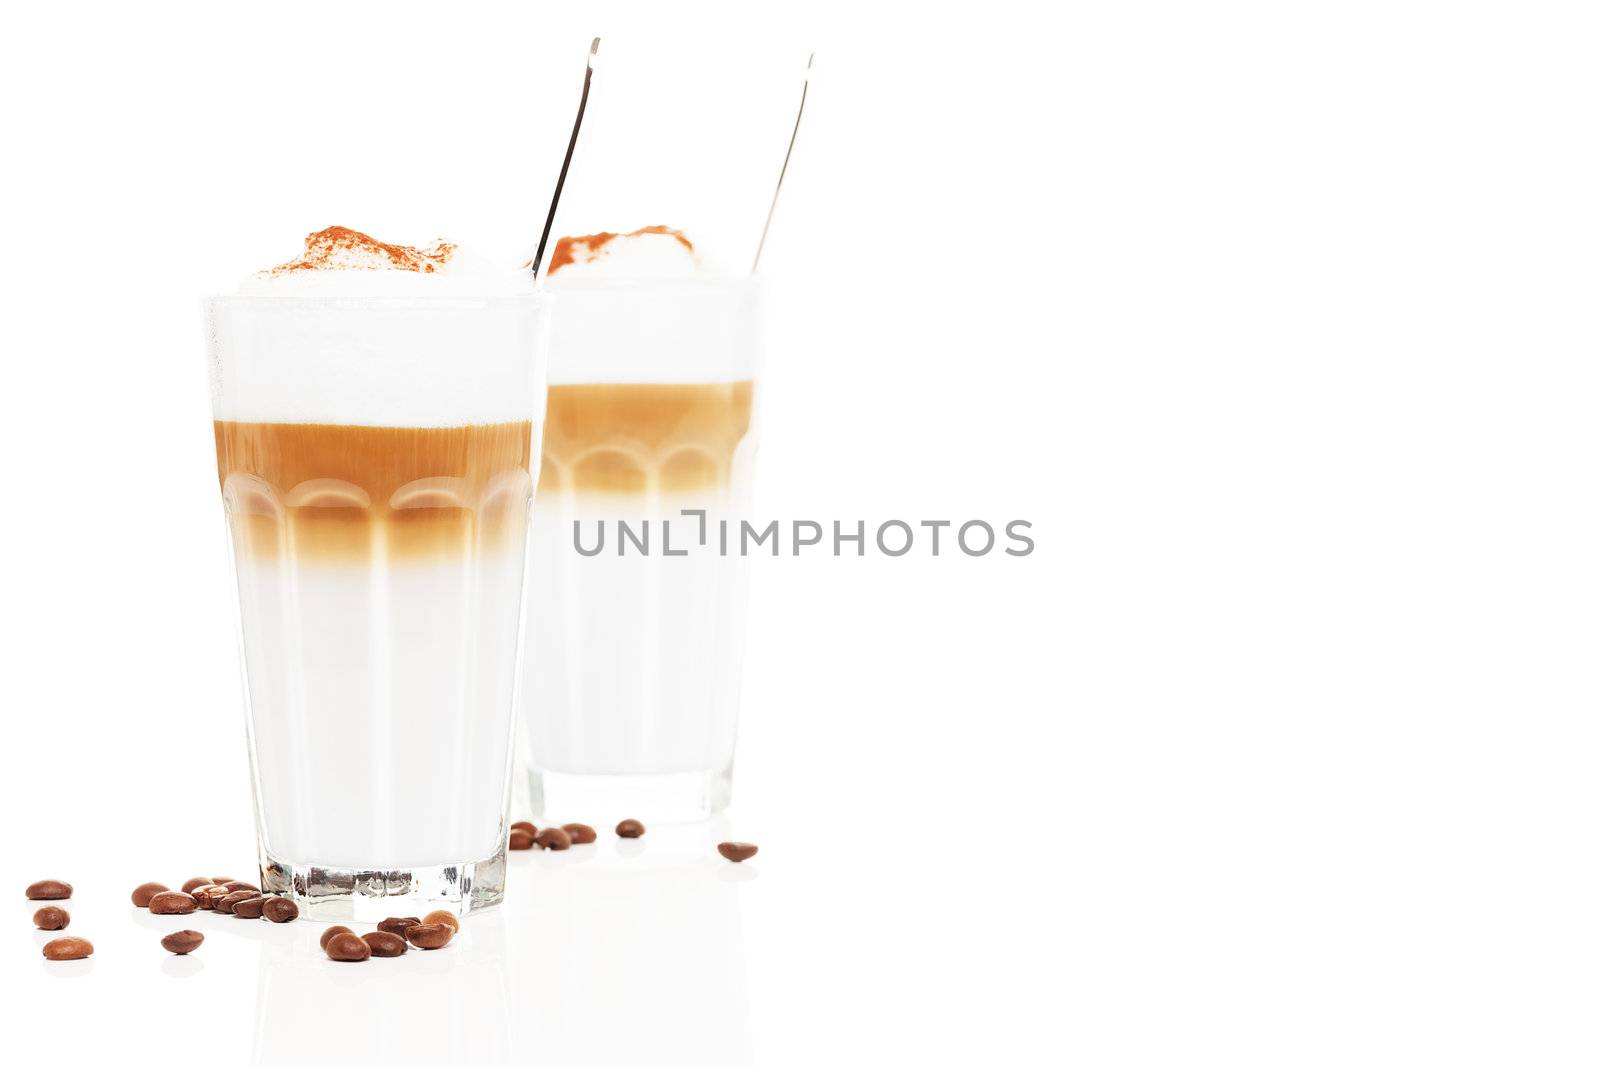 latte macchiato in front of another latte macchiato with coffee beans and spoons inside on white background